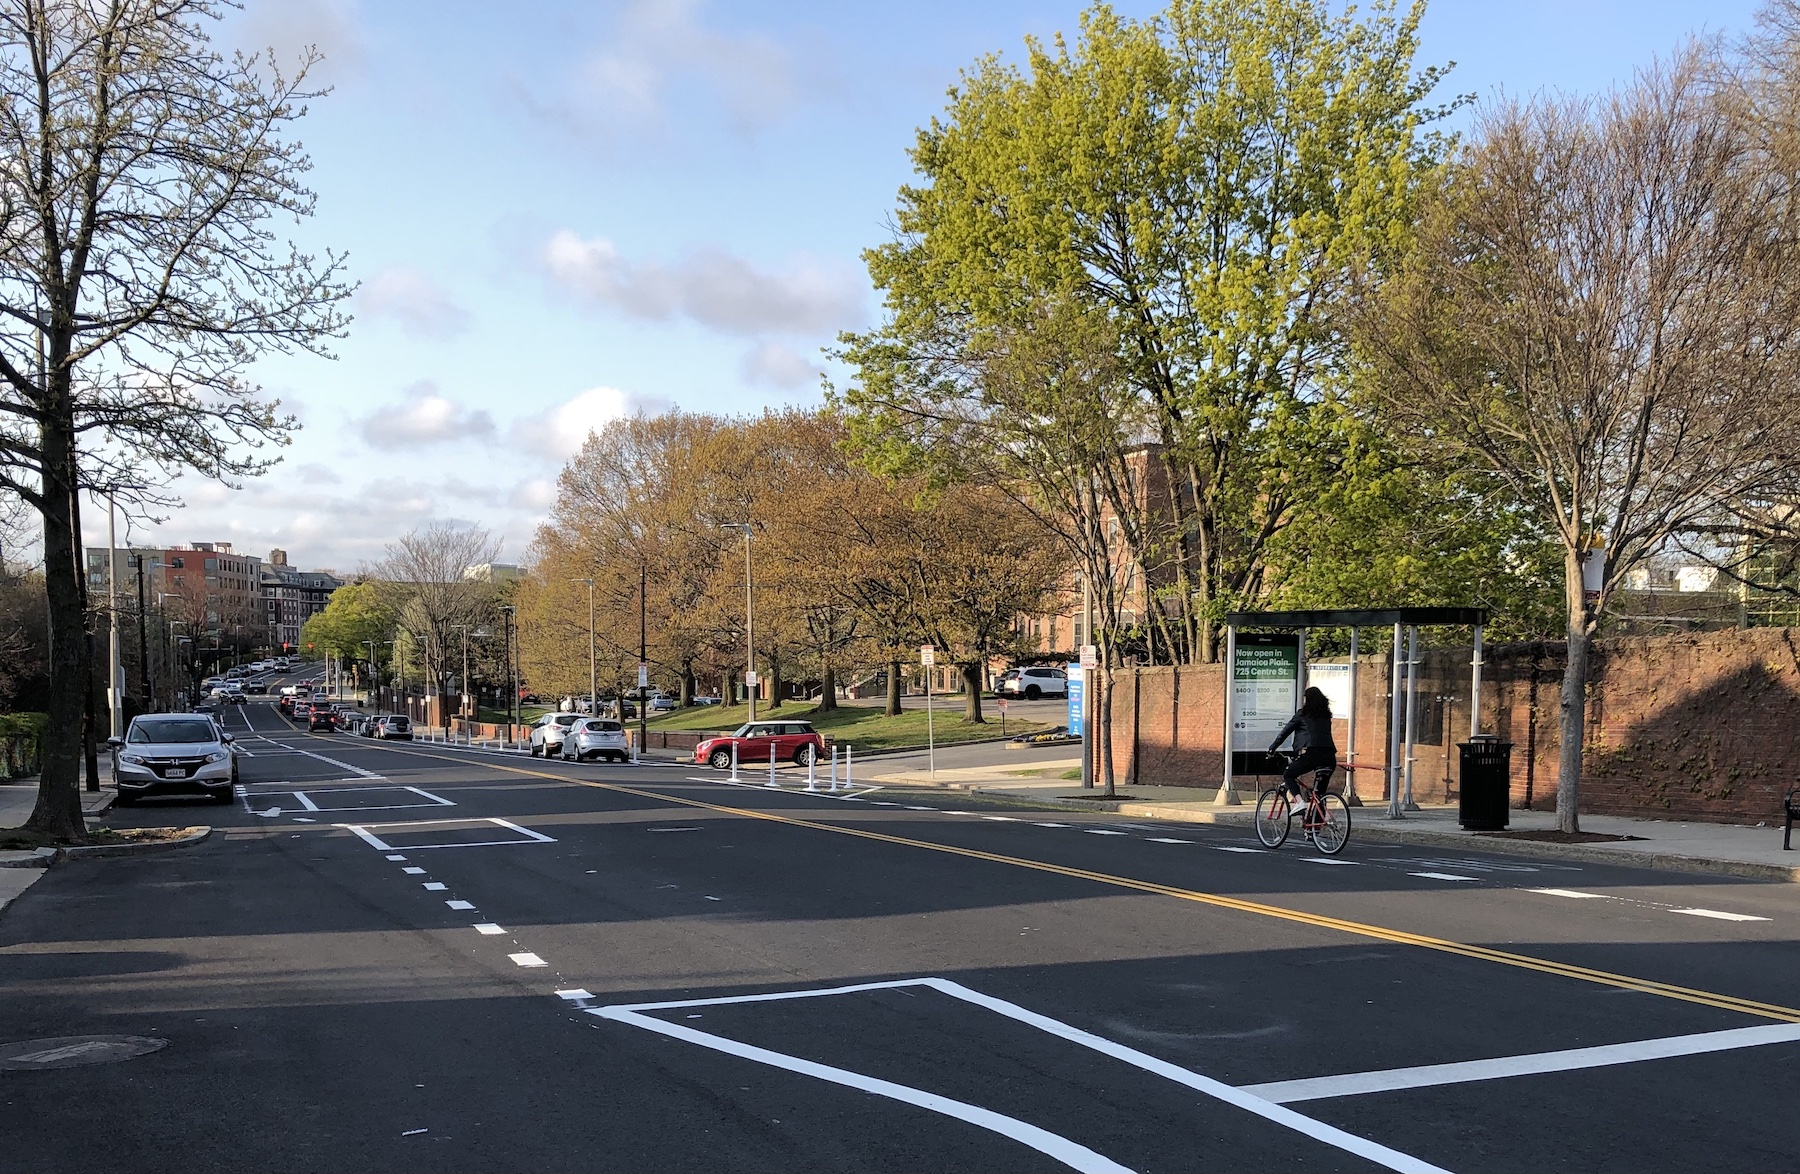 A freshly-paved street with new bicycle lane markings. On the other side of the street a woman on a bicycle rides past a bus stop. Beyond the bus stop are several large trees budding with new leaves.